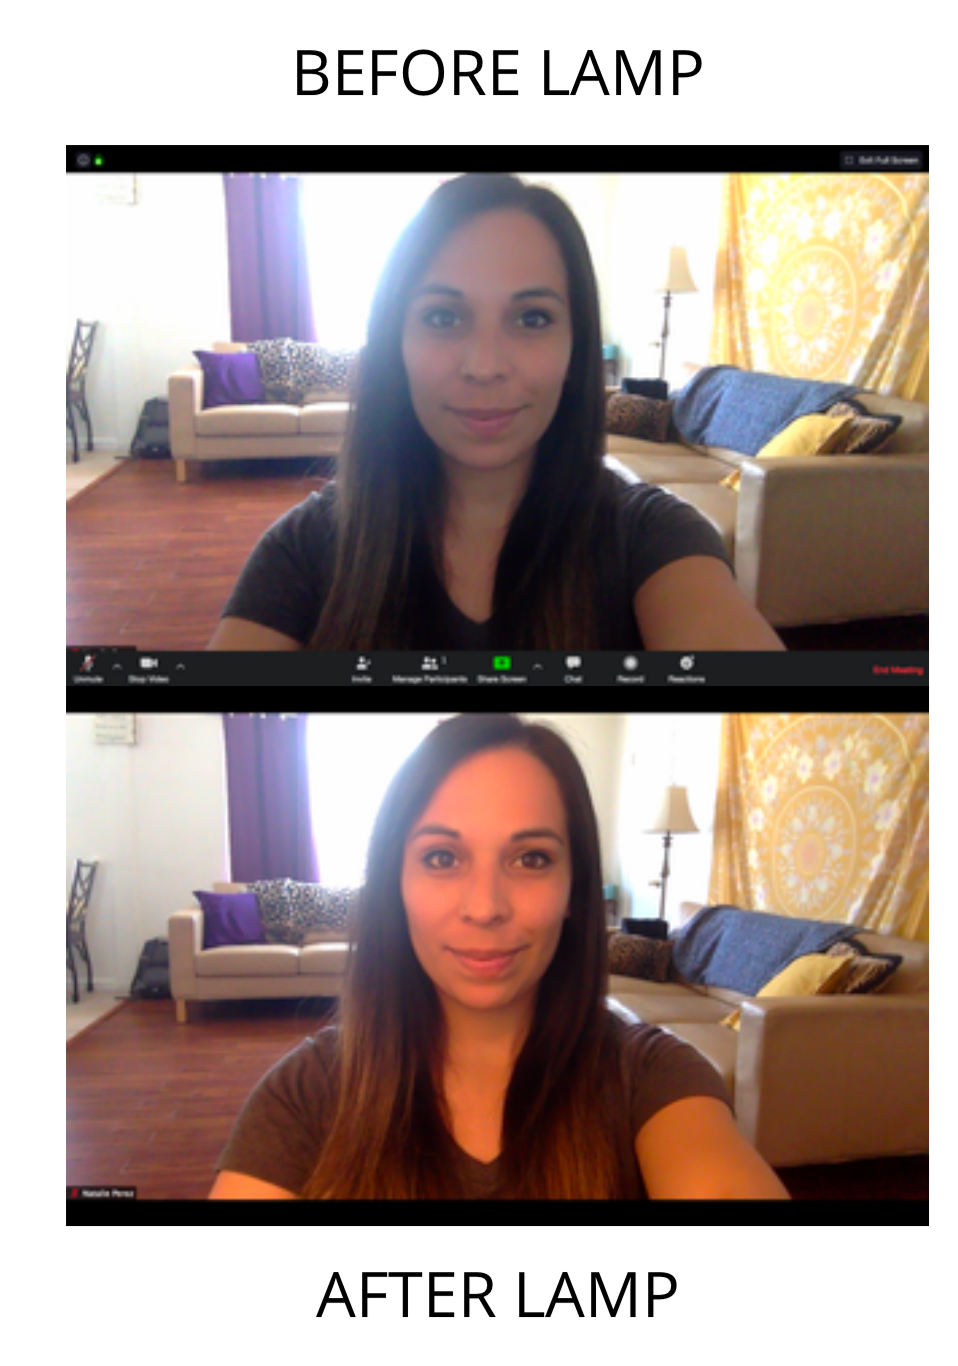 Before and after shot of Natalie’s recorded image without a lamp and with a lamp.